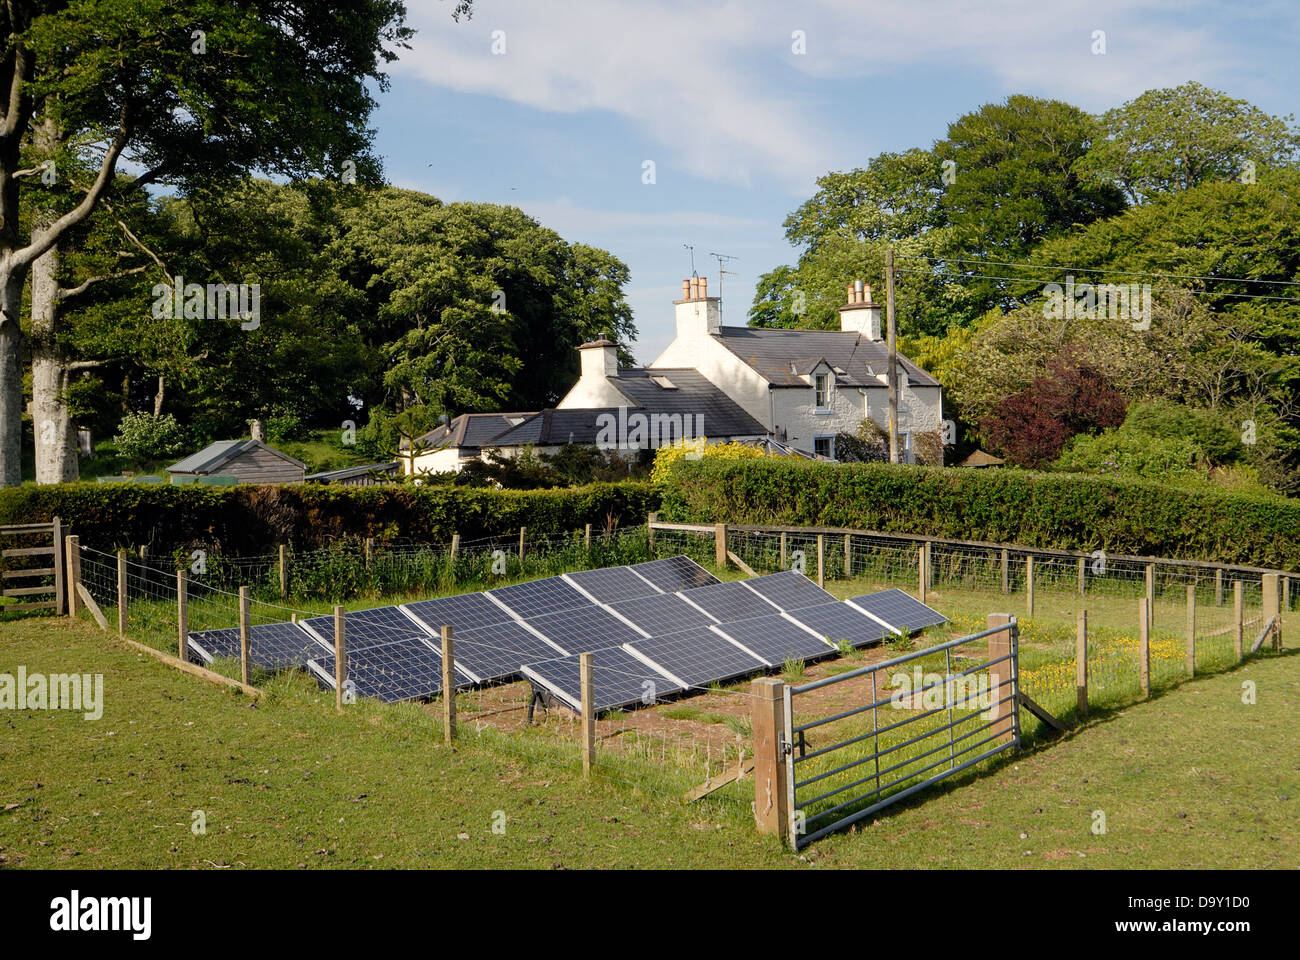 Home solar electricity generation system Stock Photo